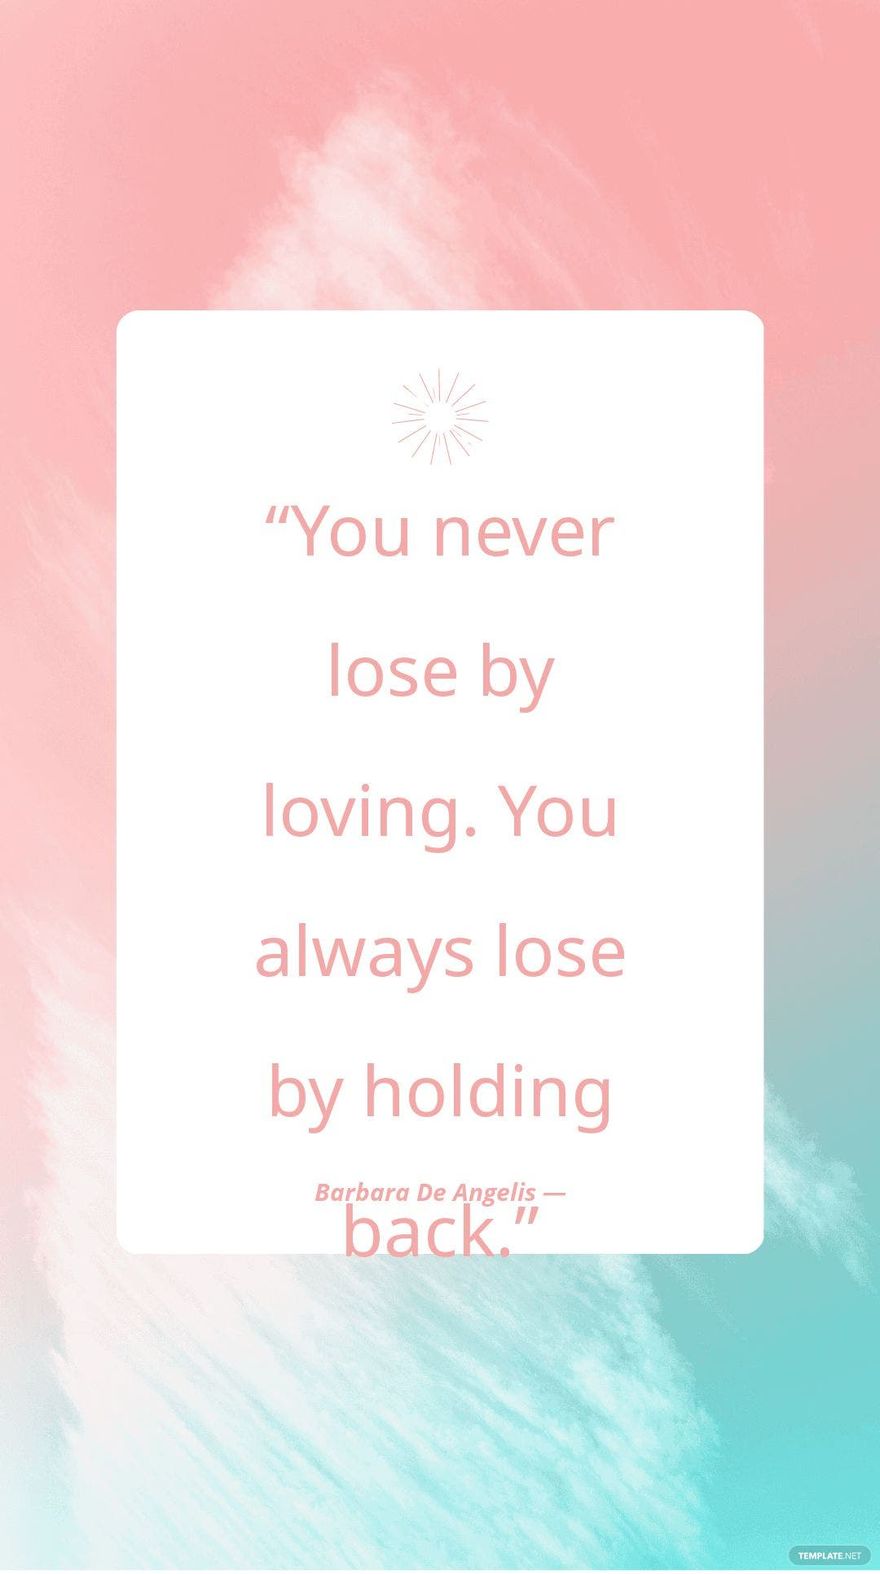 Barbara De Angelis — “You never lose by loving. You always lose by holding back.”